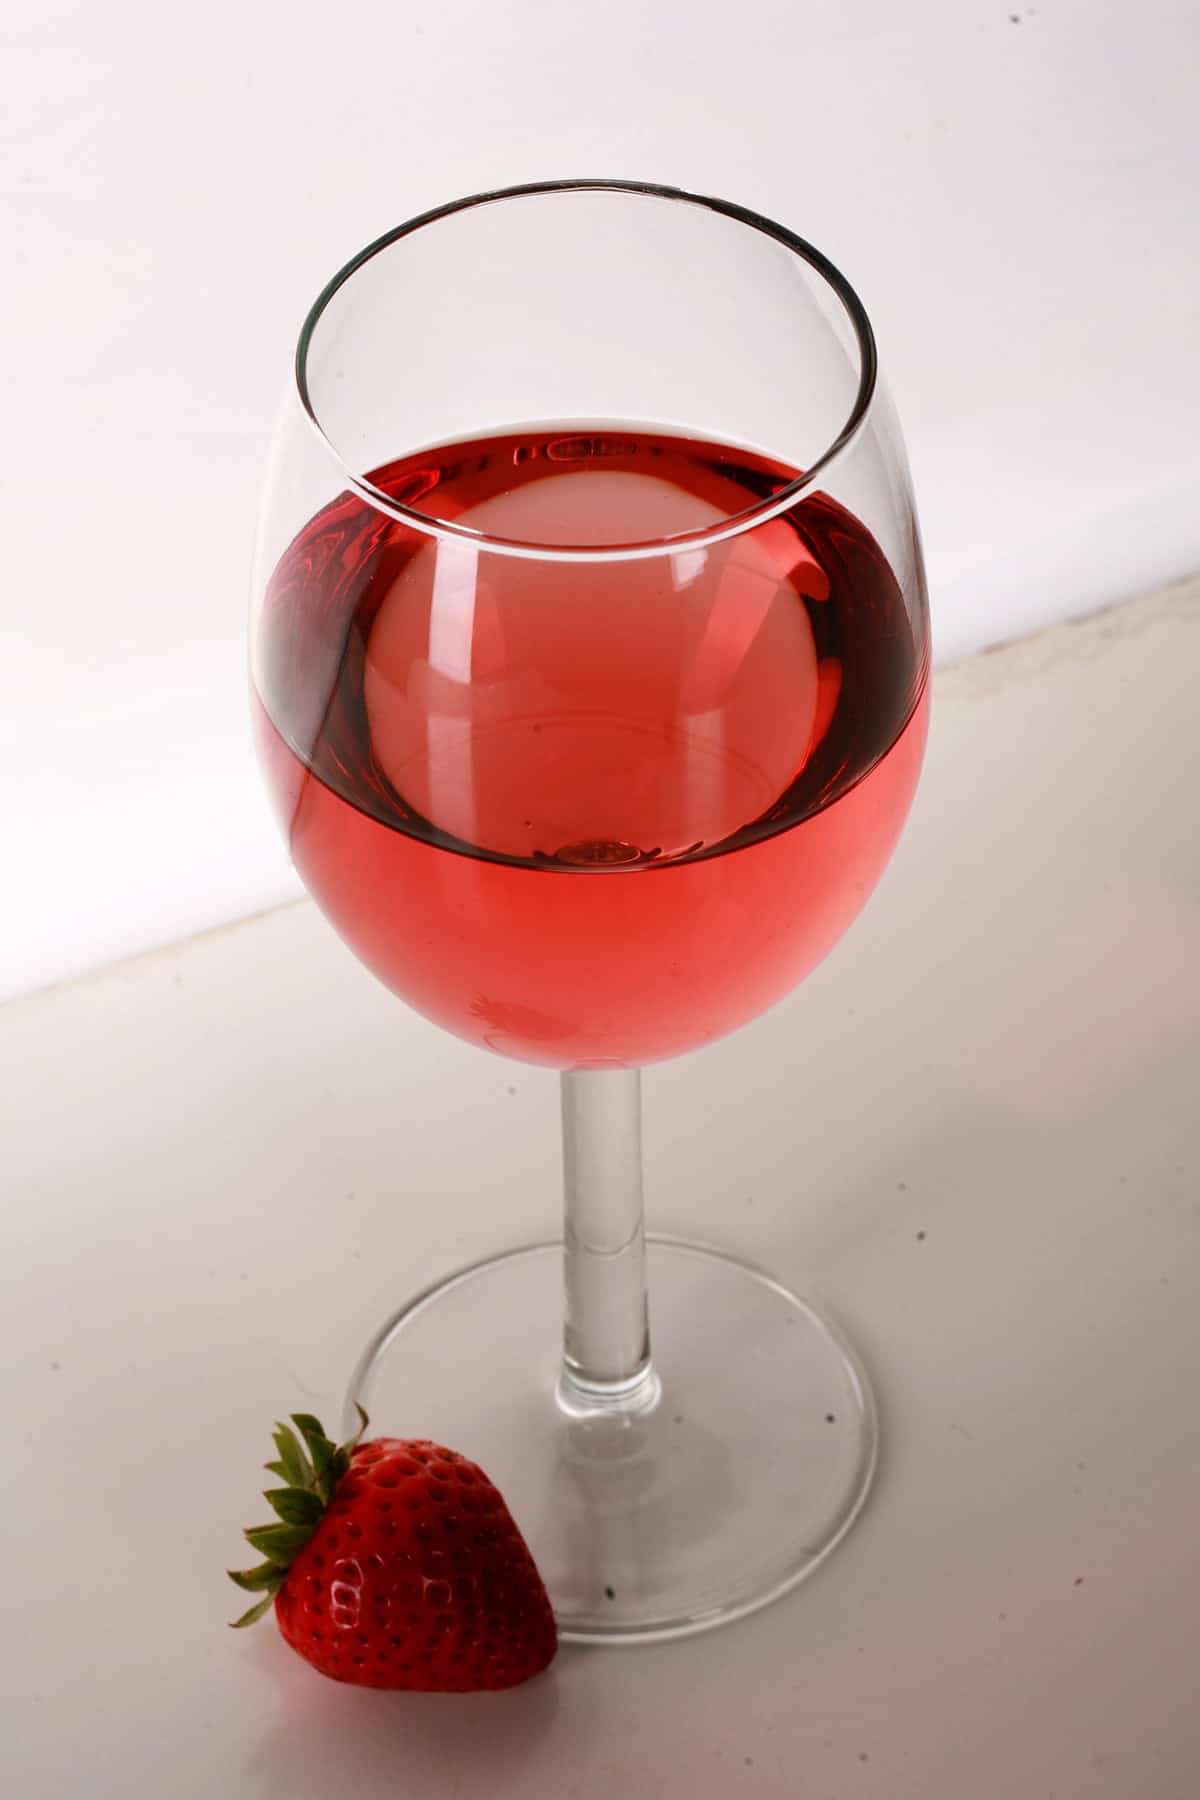 A glass of pale red strawberry wine is pictured, with a single strawberry at the base of the glass.